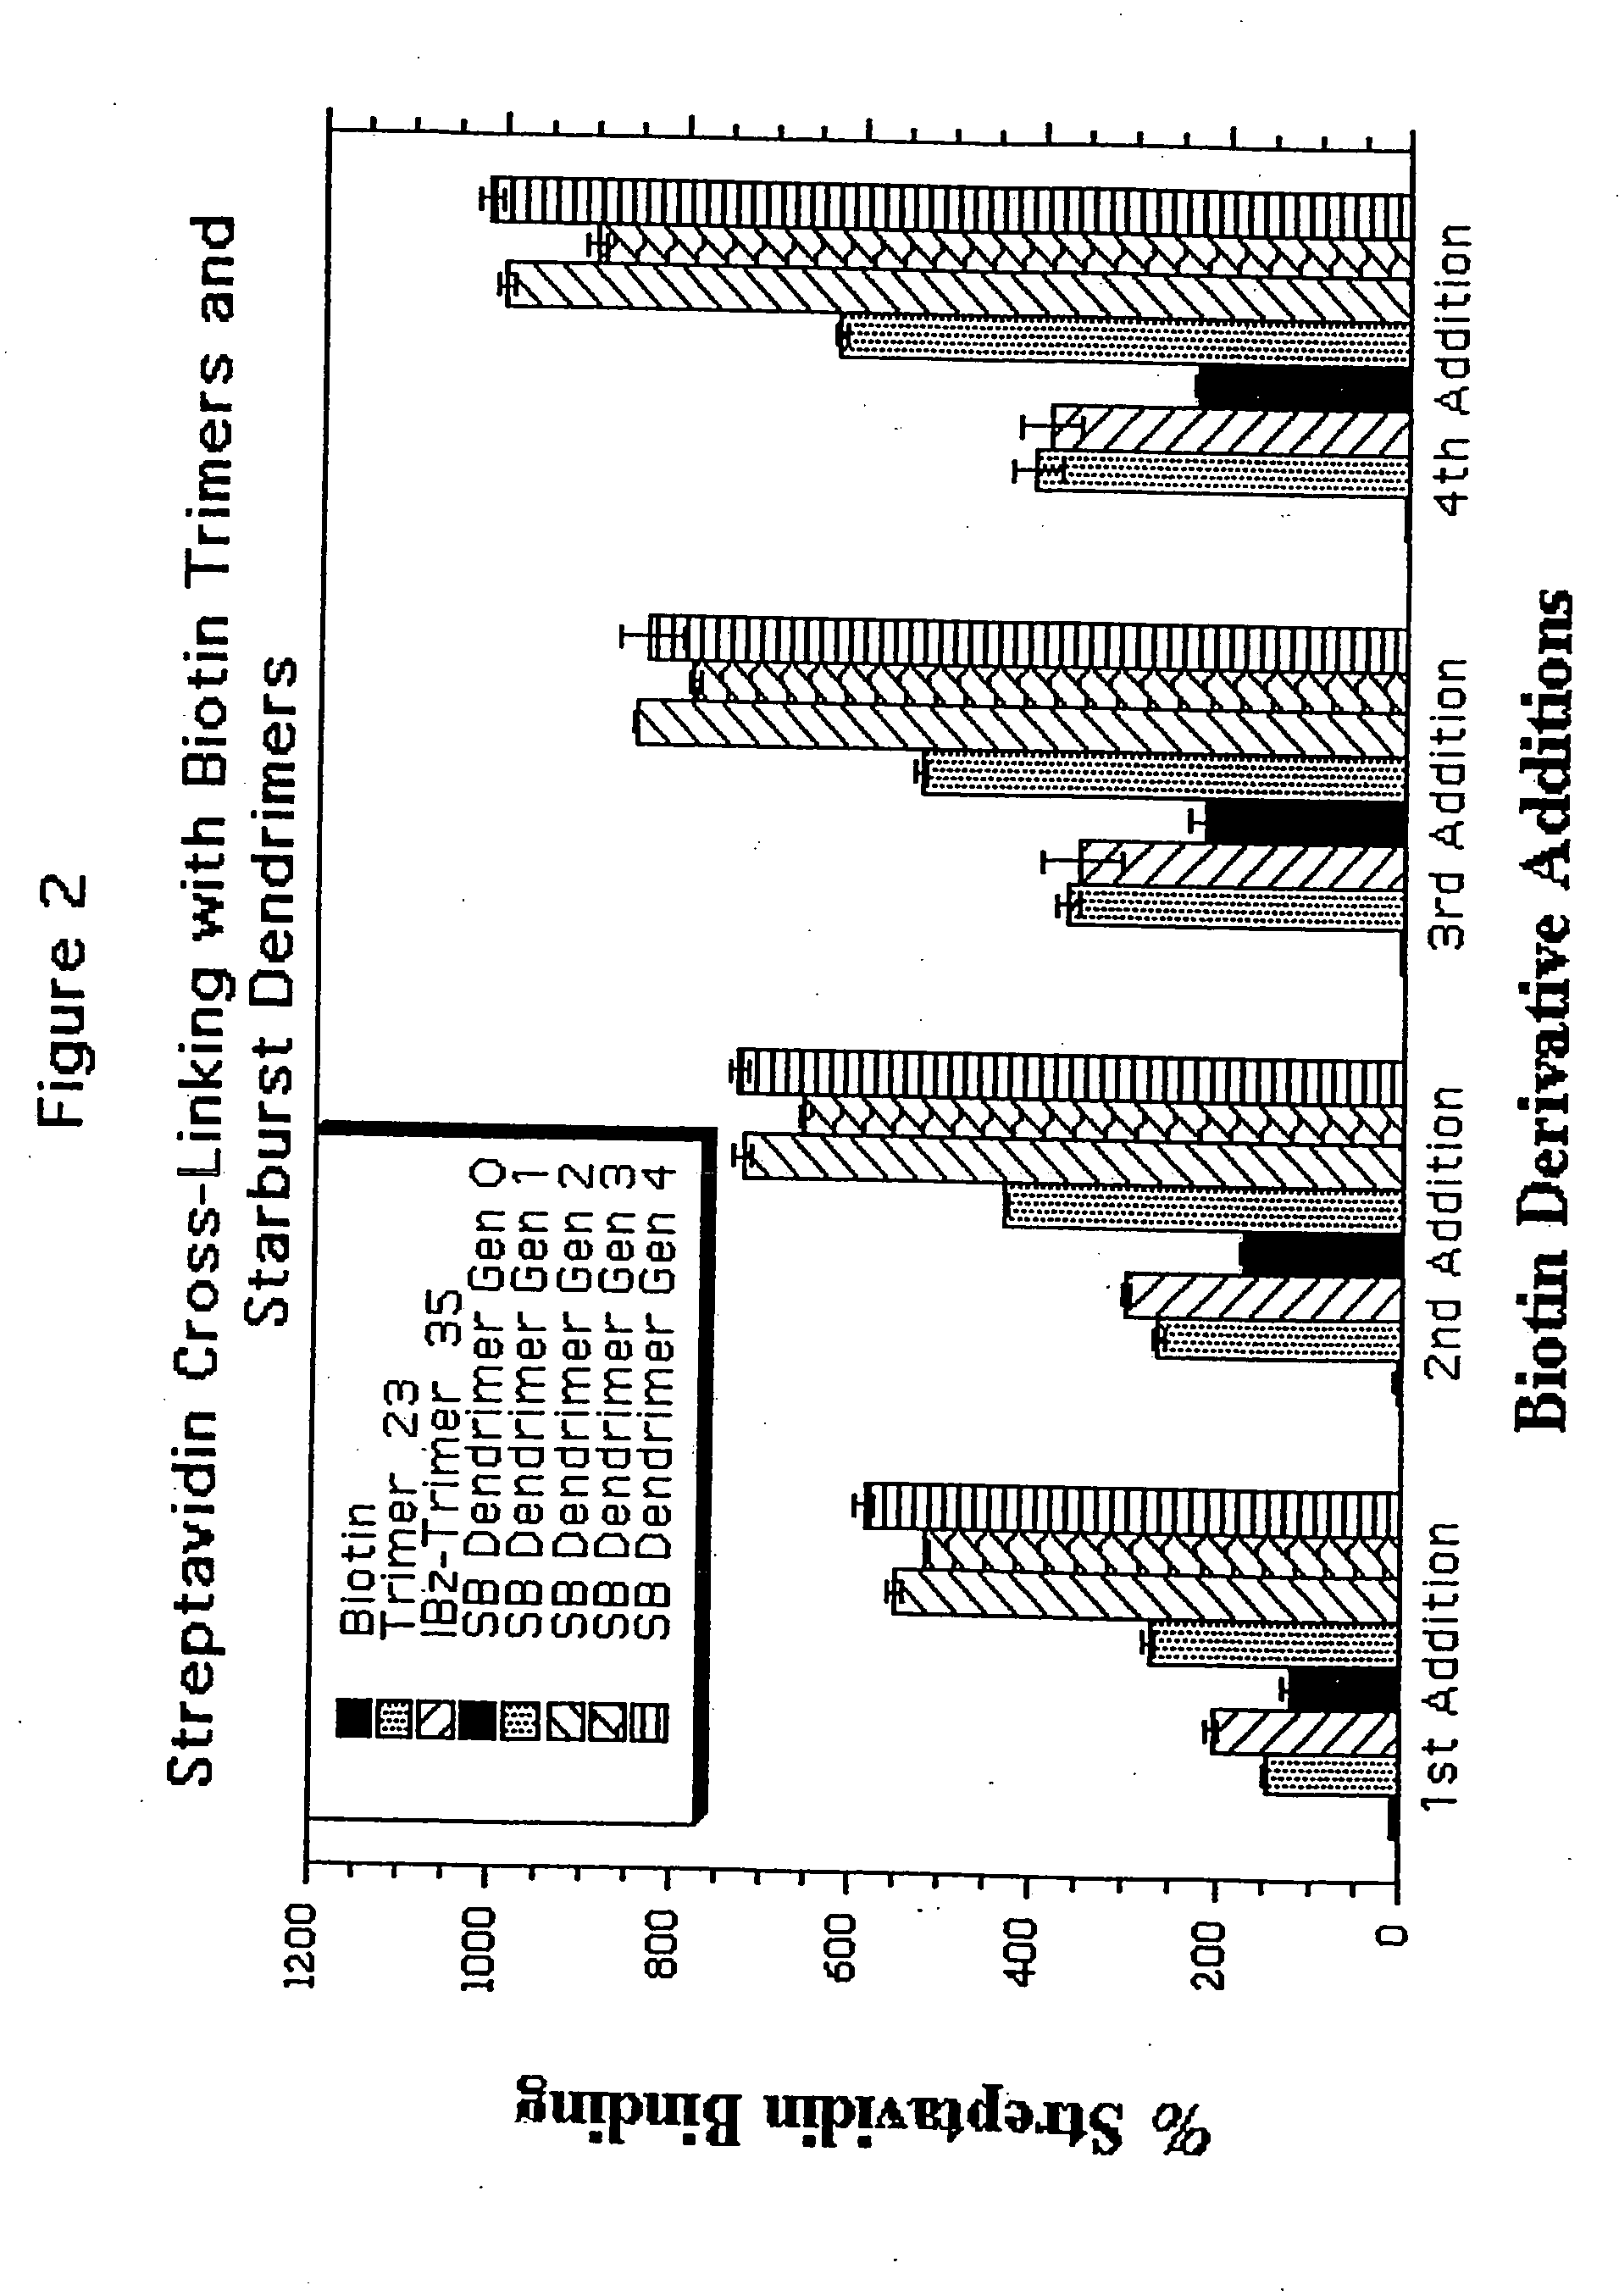 Water soluble multi-biotin-containing compounds